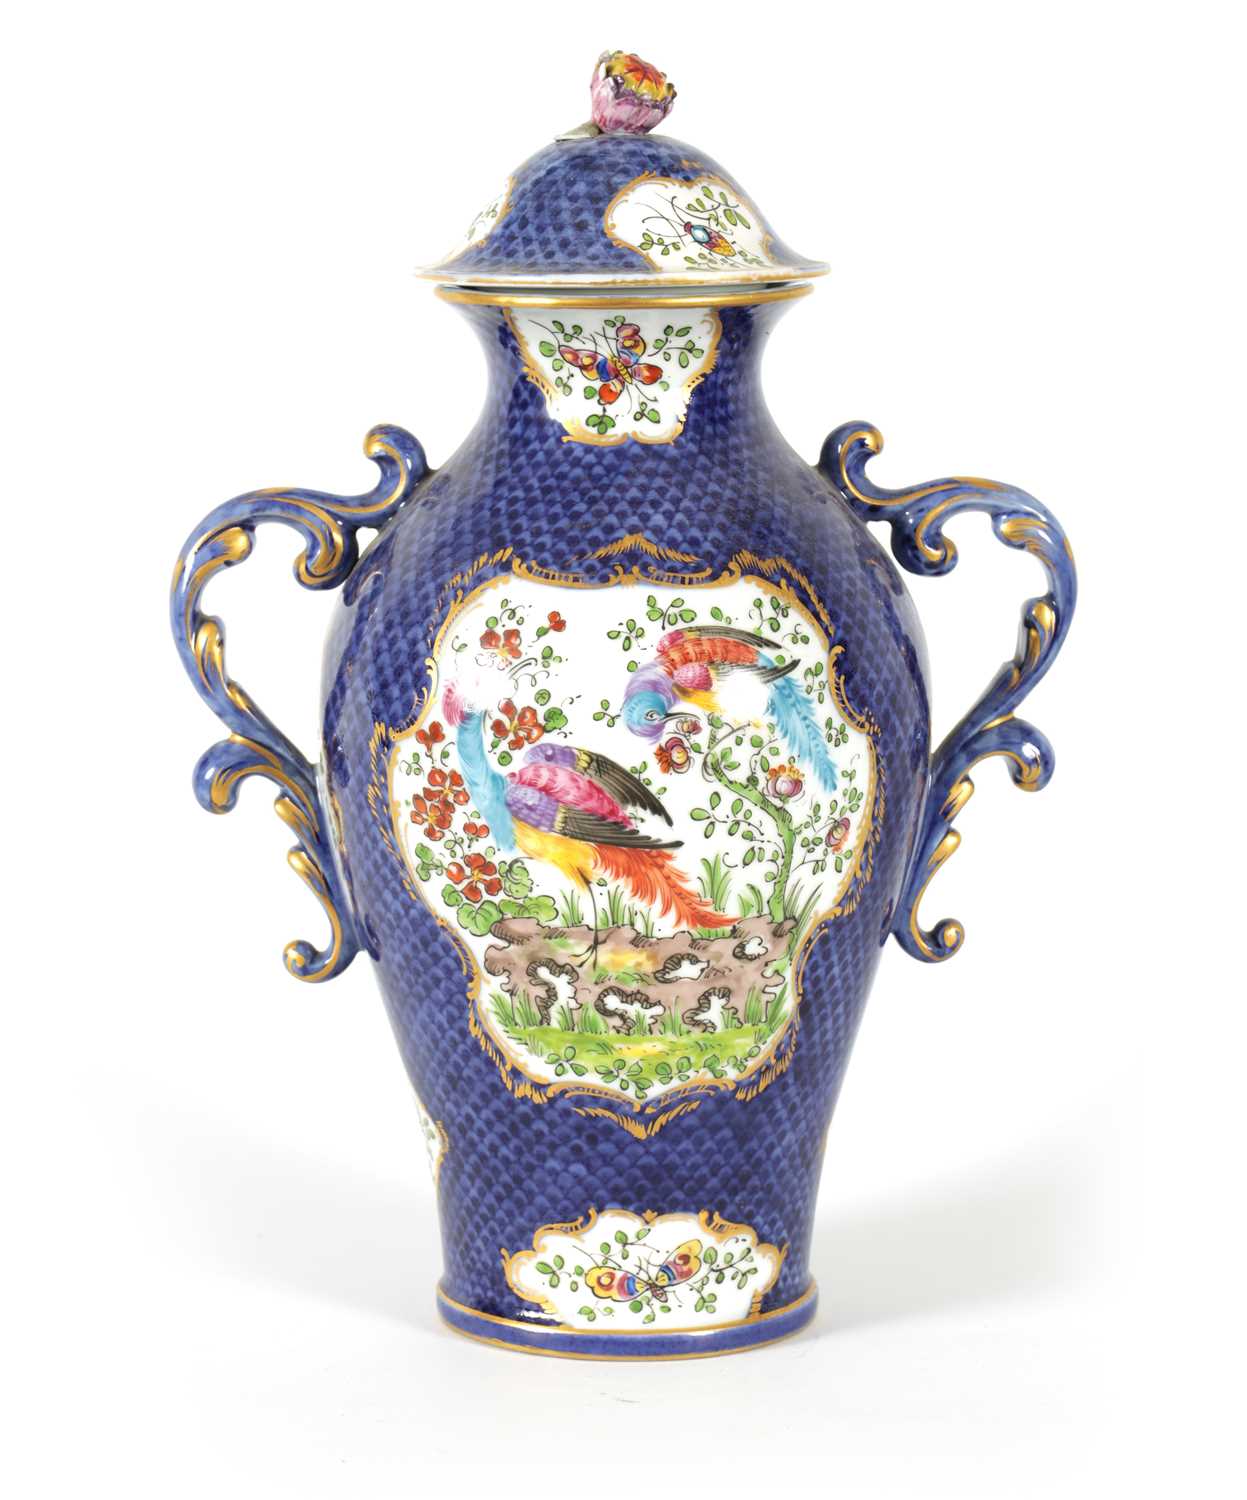 A LATE 19TH CENTURY FIRST PERIOD WORCESTER TYPE TWO-HANDLED SHOULDERED VASE AND COVER - PROBABLY SAM